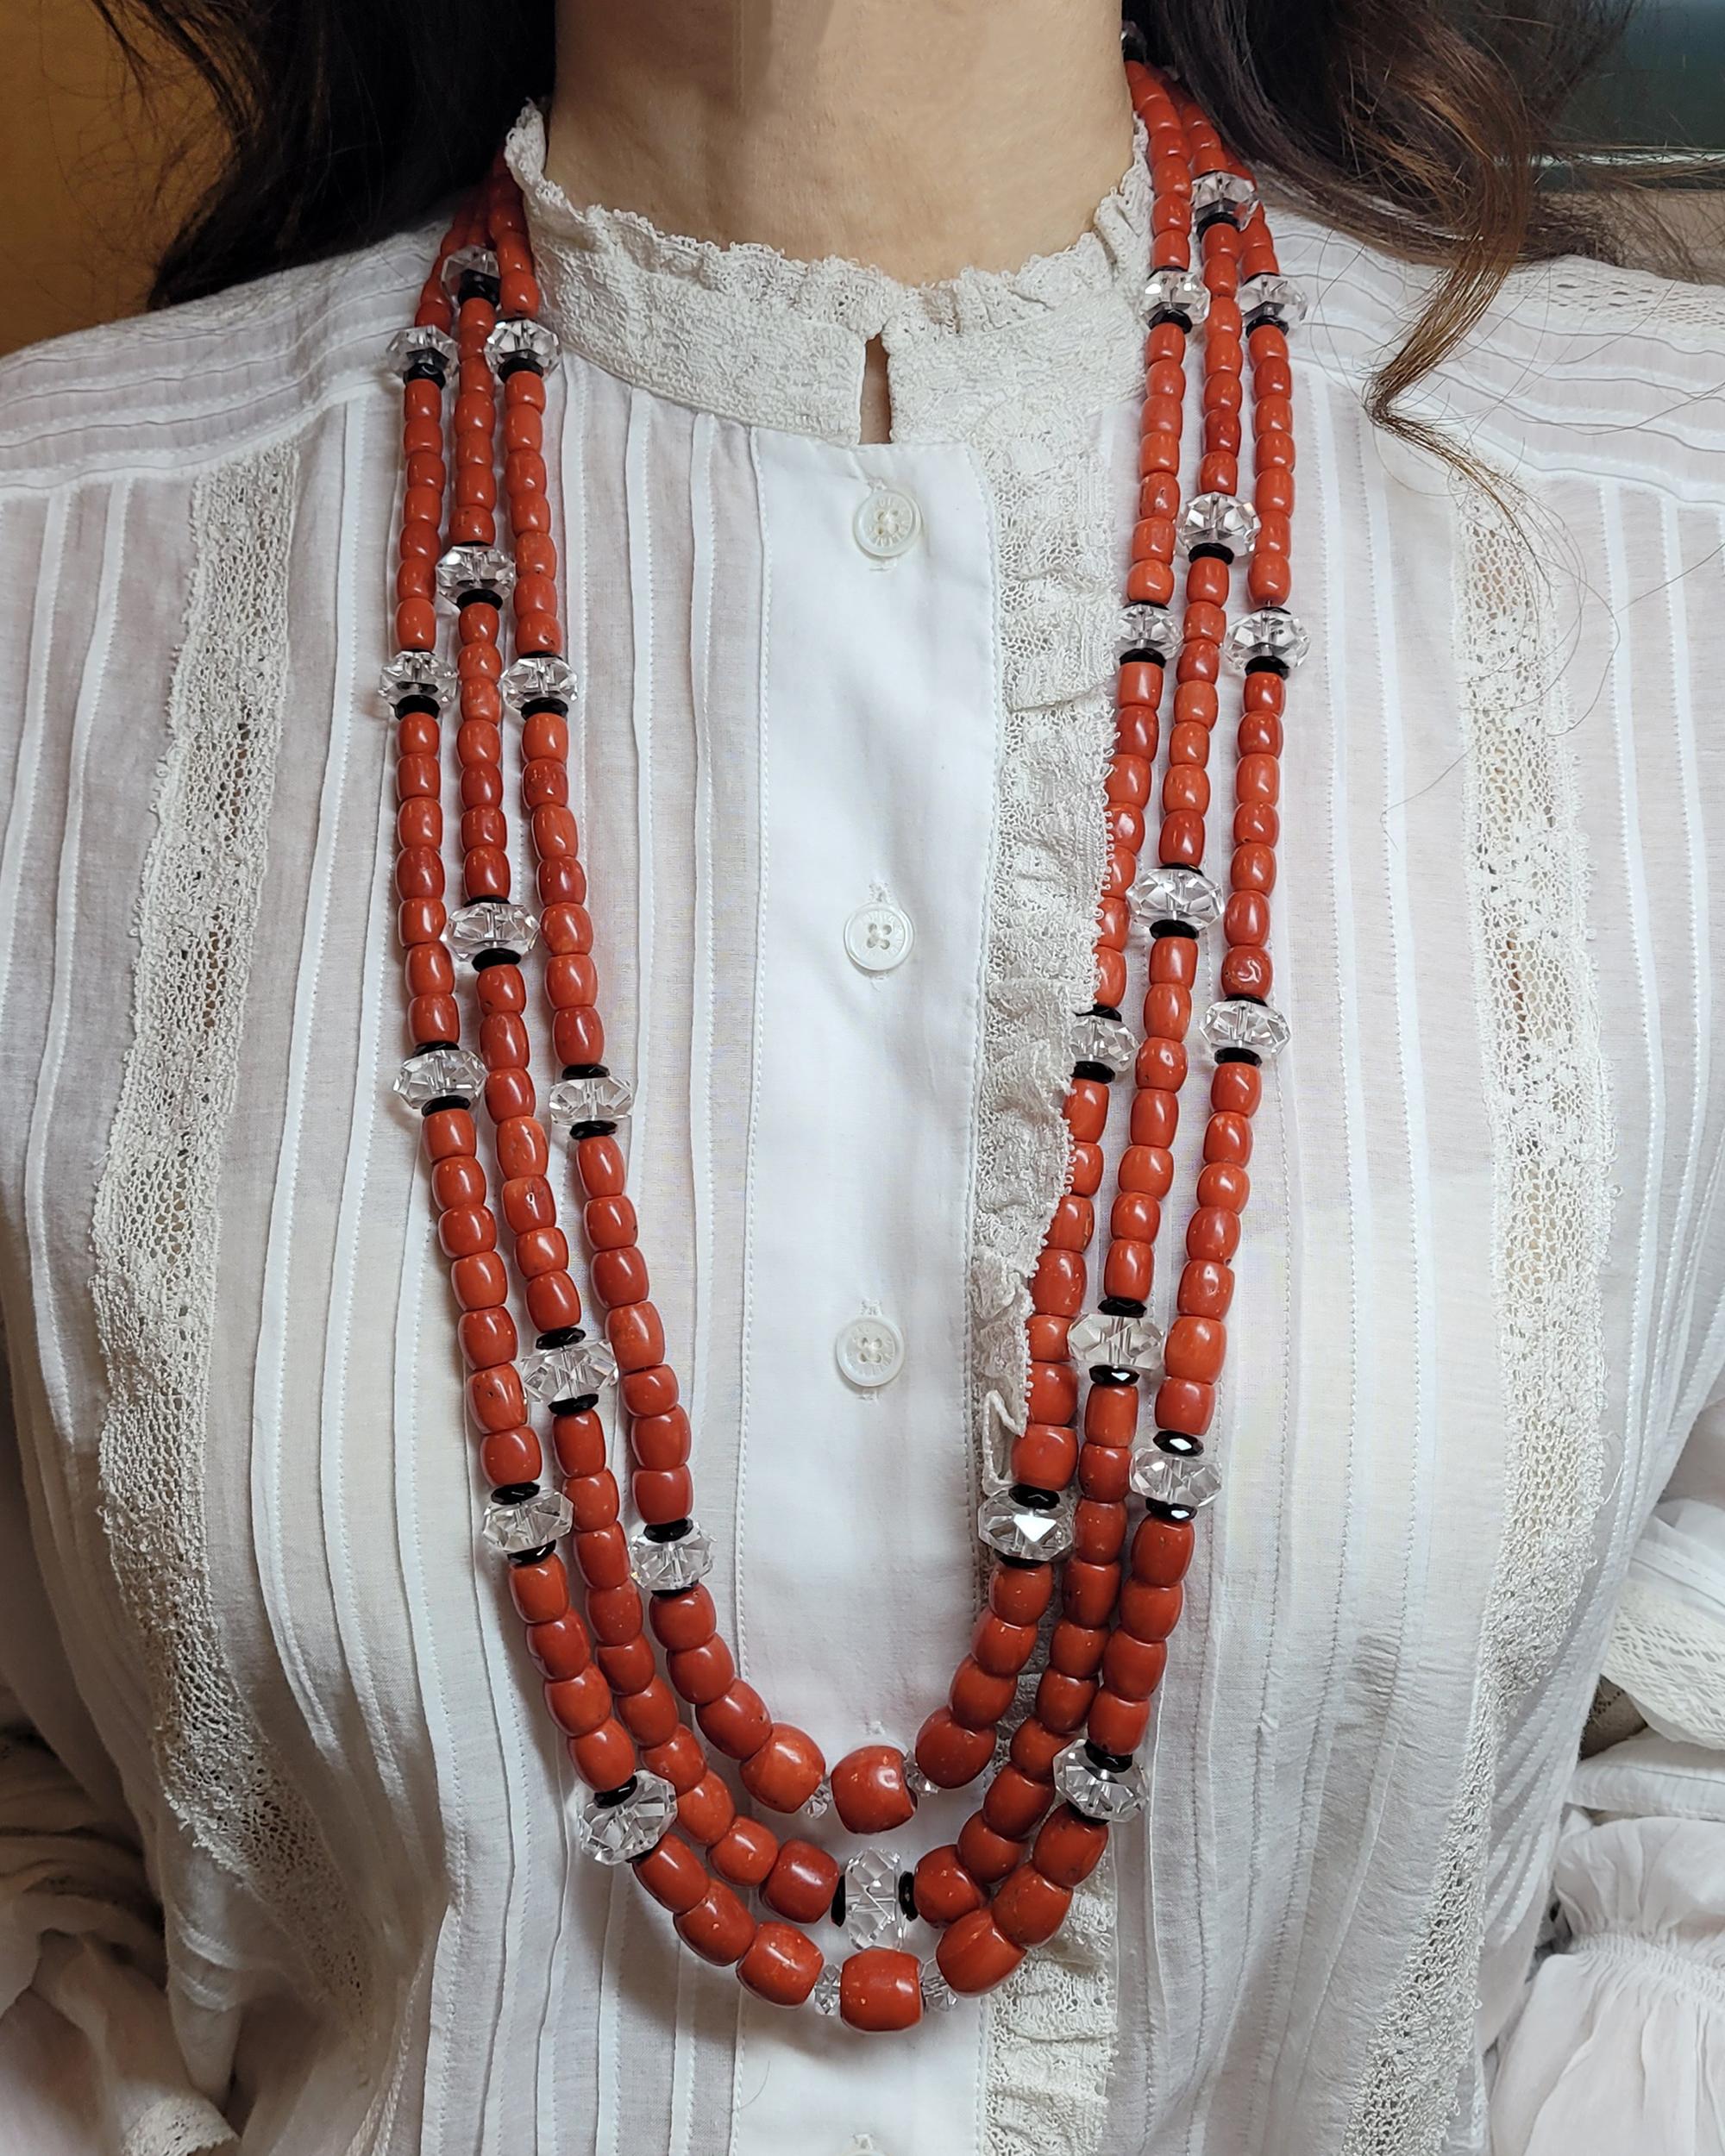 A colorful three-strand necklace can complete a fashionable sundress as elegantly as it can add a solid impact to a smartly tailored suit. This ultra-long and versatile Coral Bead Rock Crystal Necklace, made in the 21st Century, will take you from